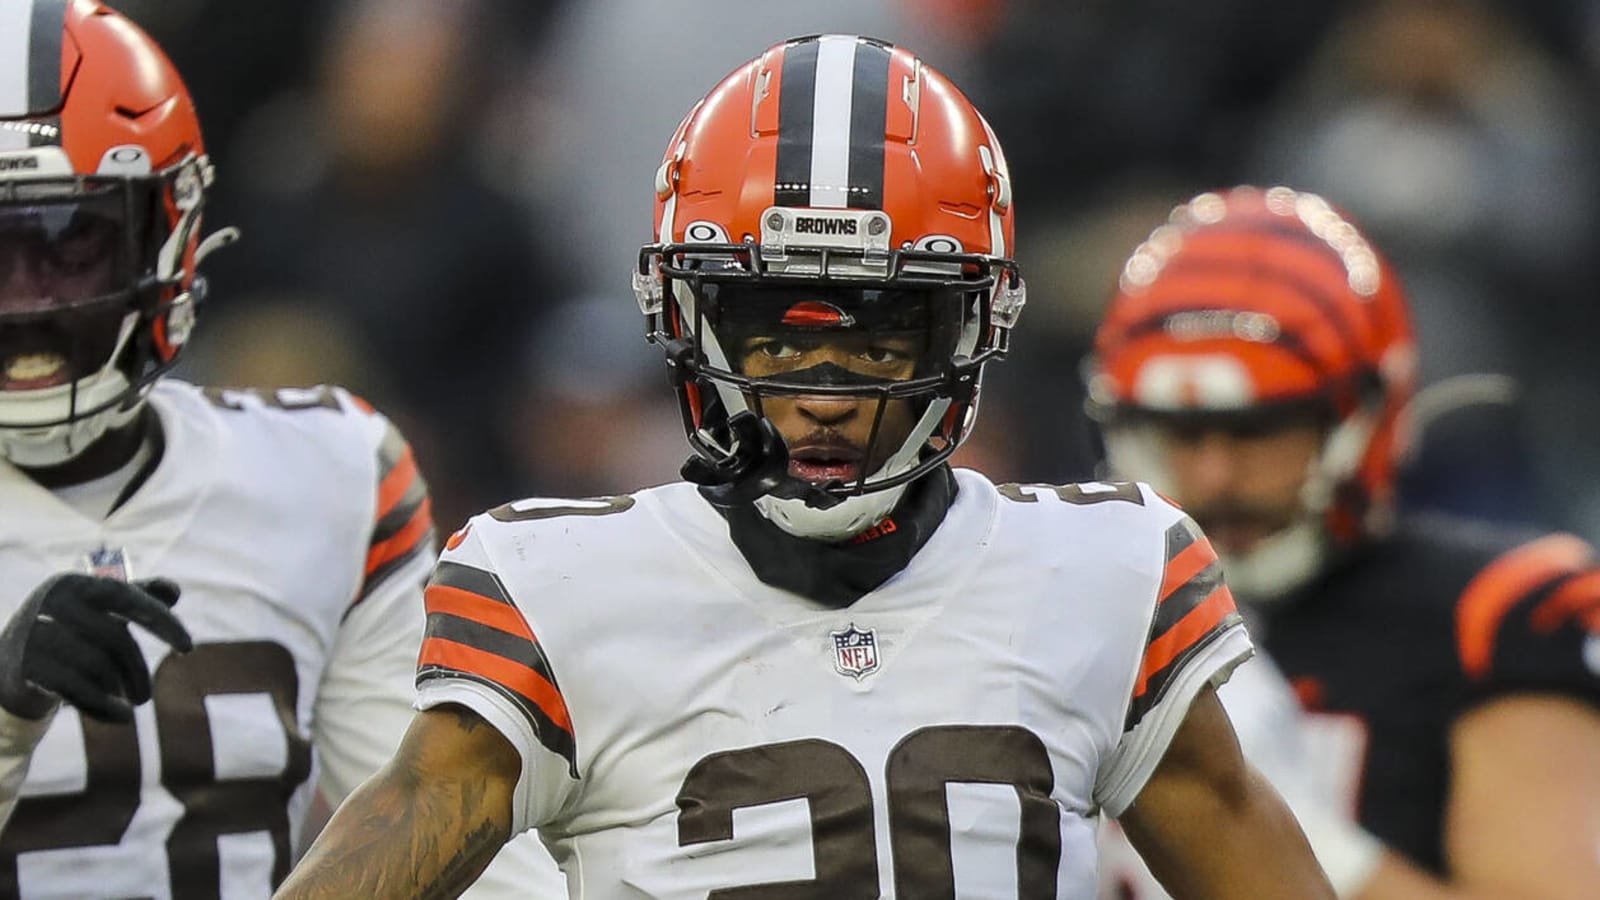 Browns starter addresses rumors that he wants trade